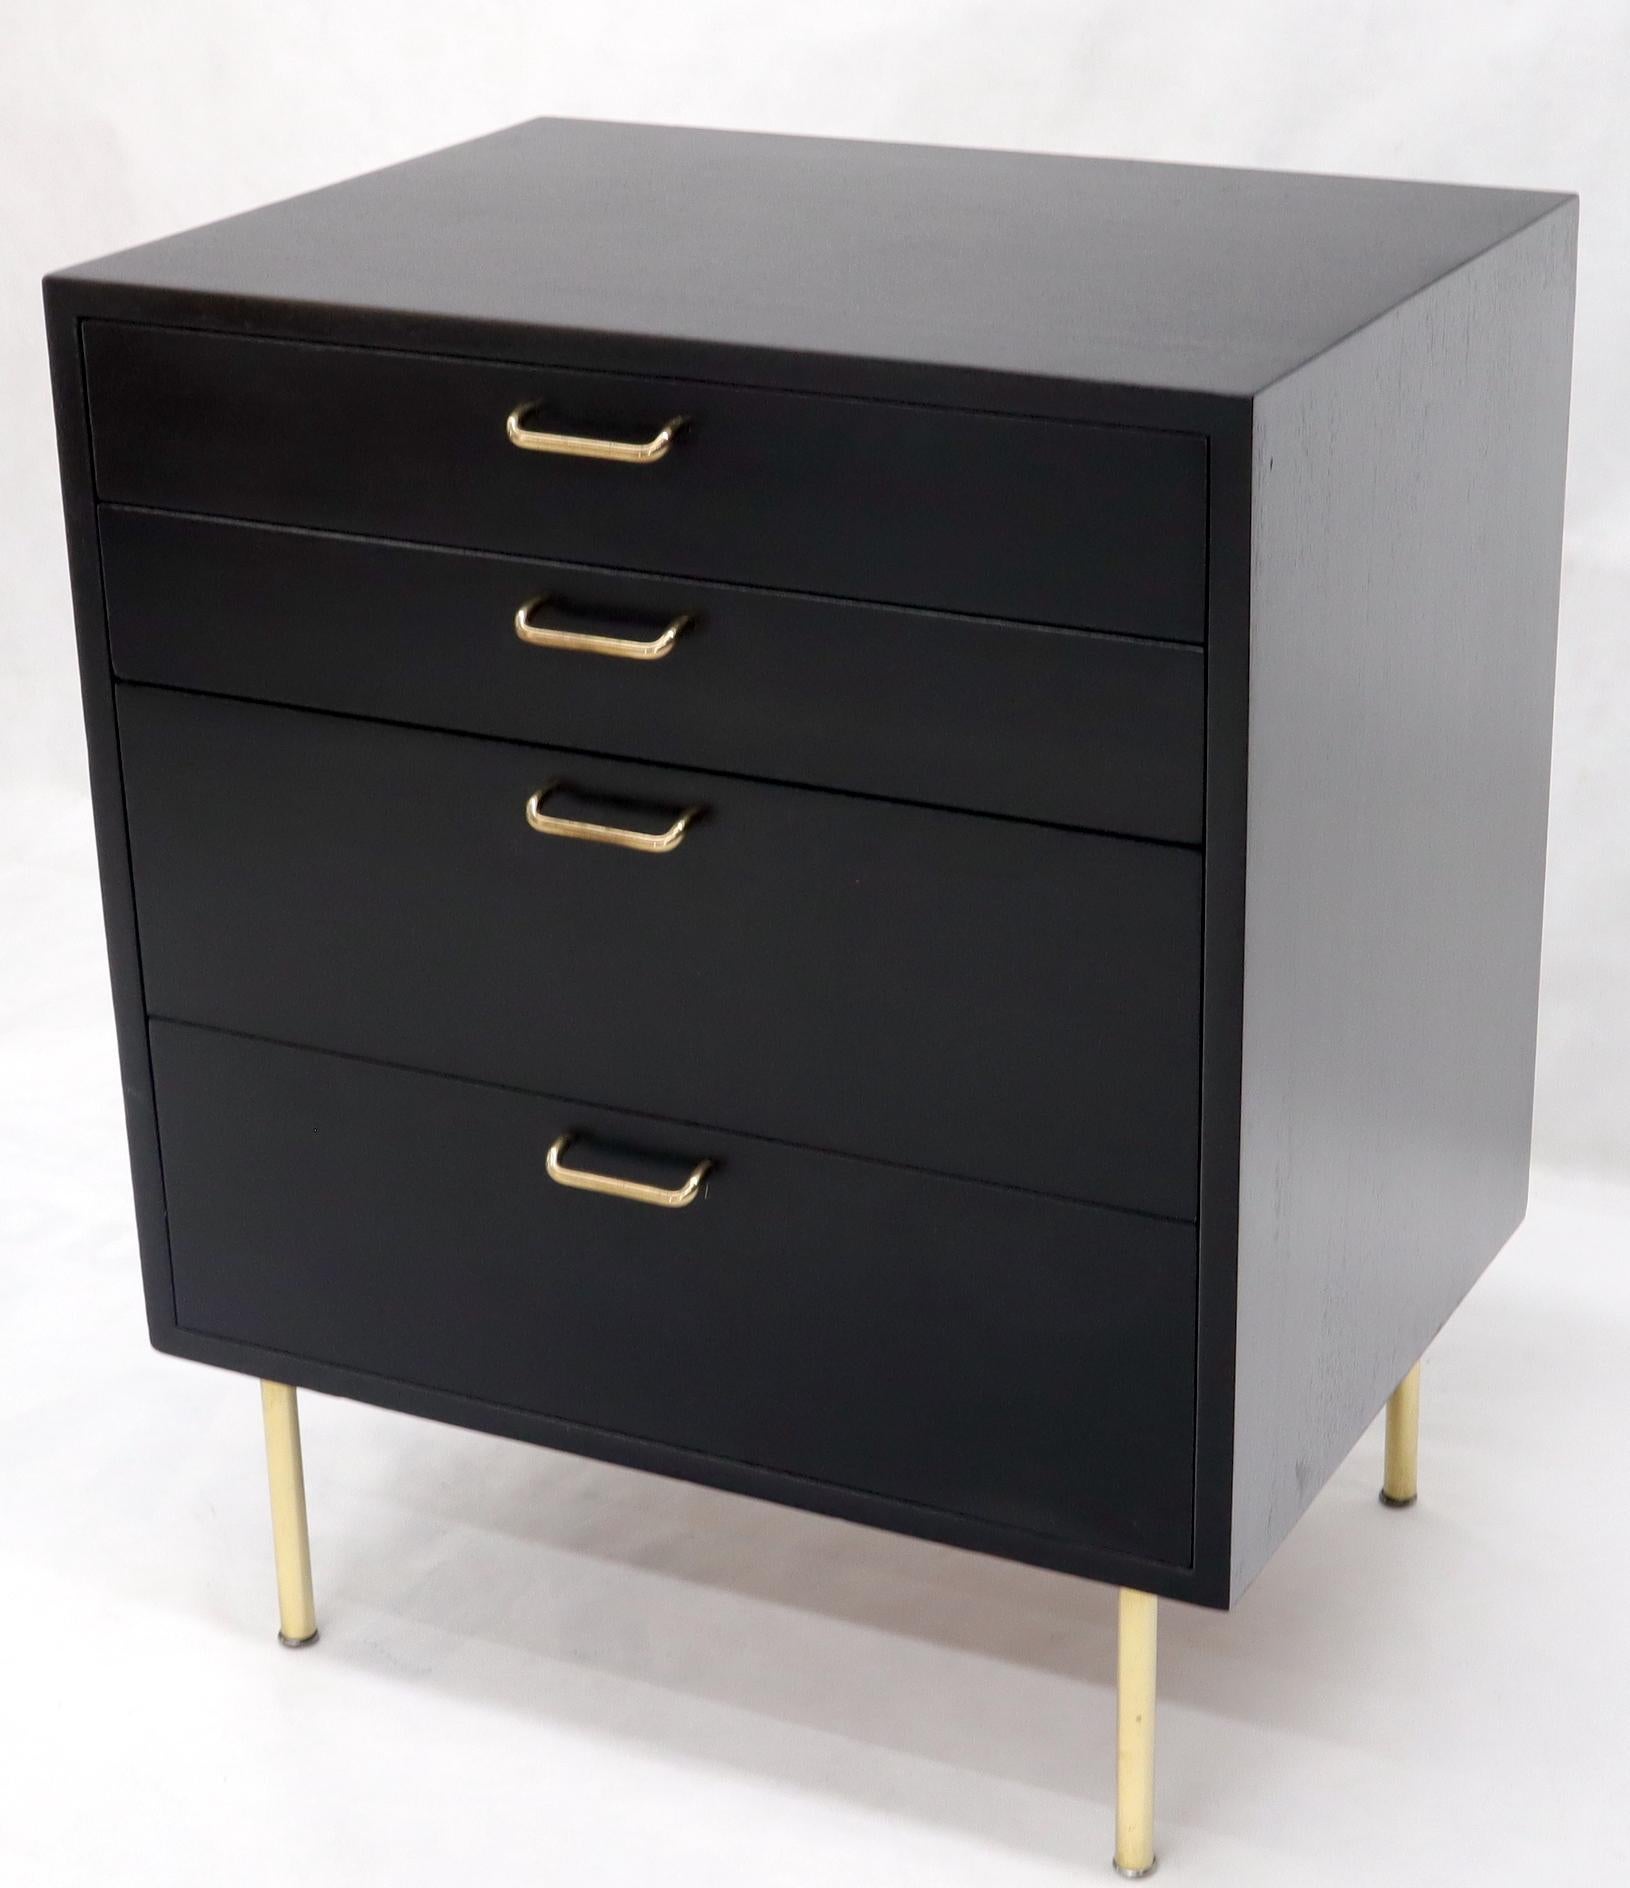 Mid-Century Modern black lacquer mahogany brass hardware bachelor chest compact dresser by Harvey Probber.